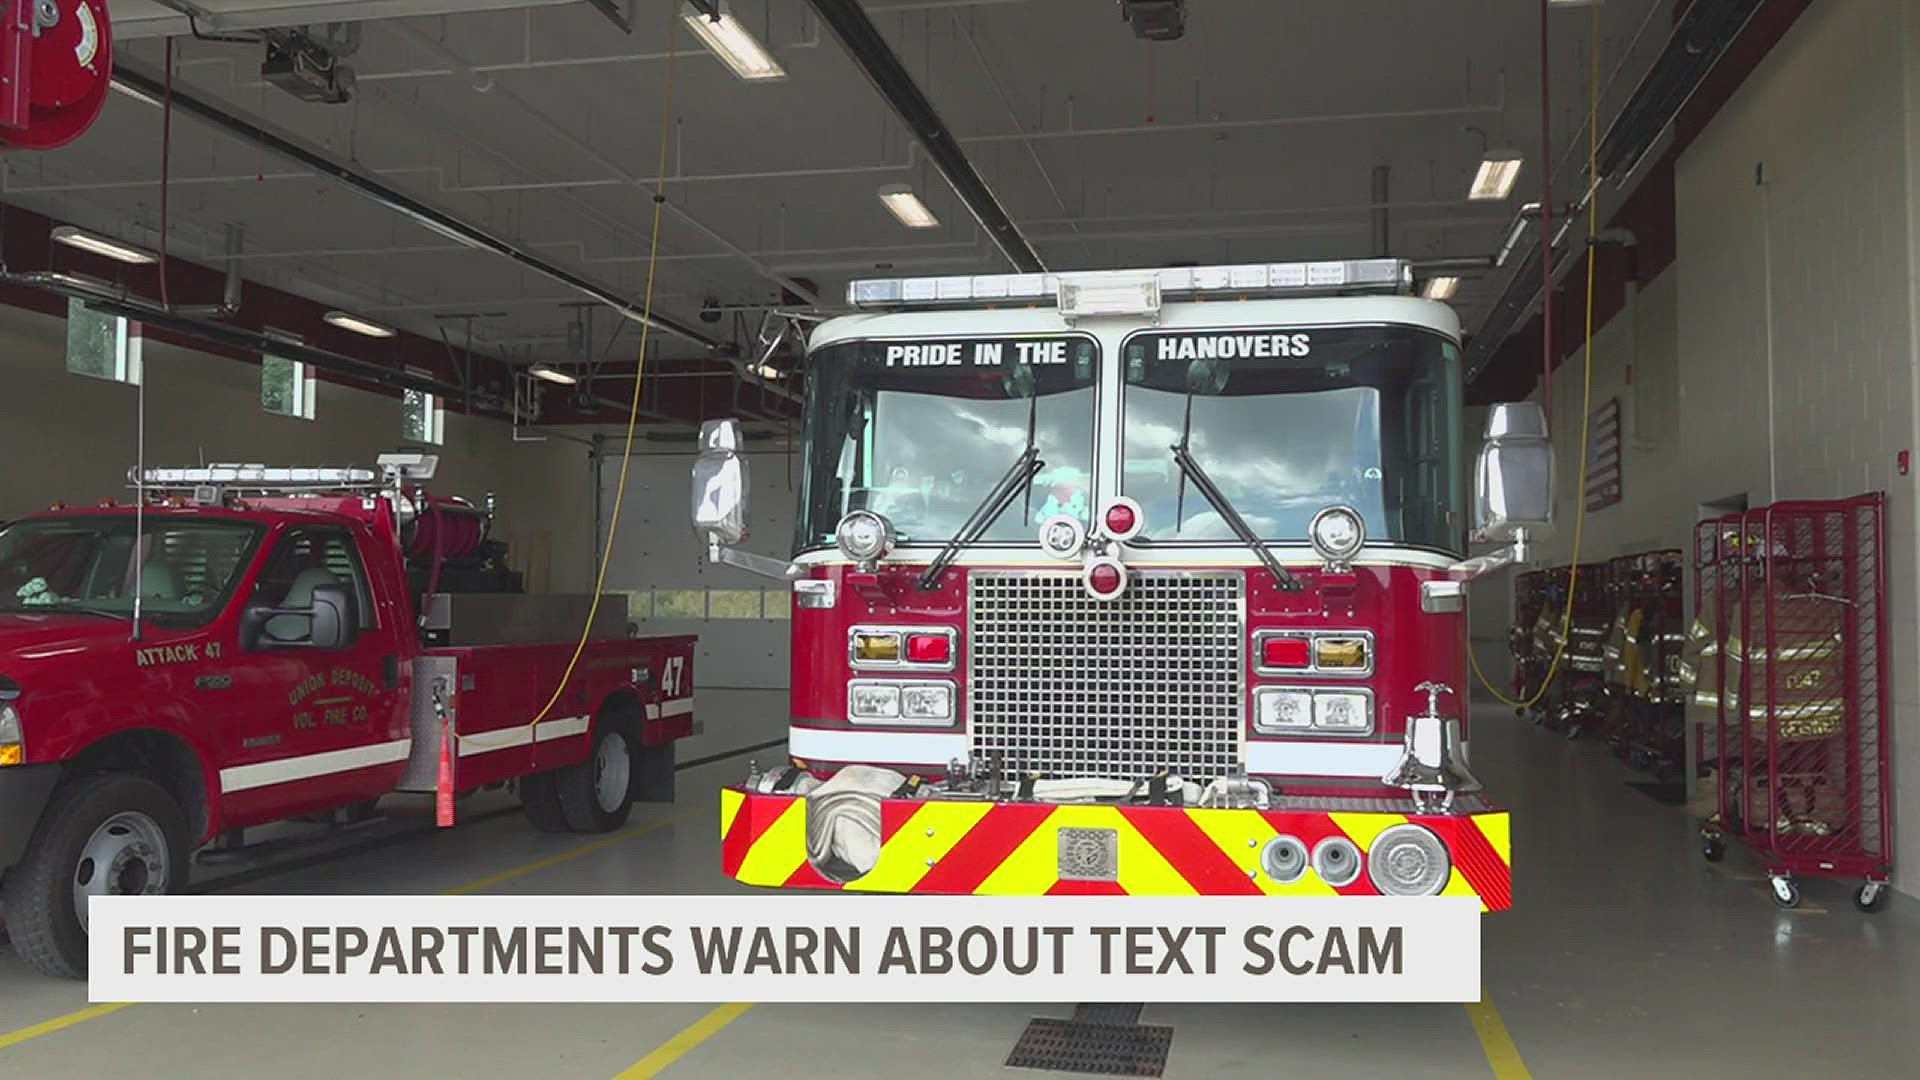 Multiple fire companies have posted about the scam, which is typically a text message which claims to sell affiliated t-shirts with the fire department.